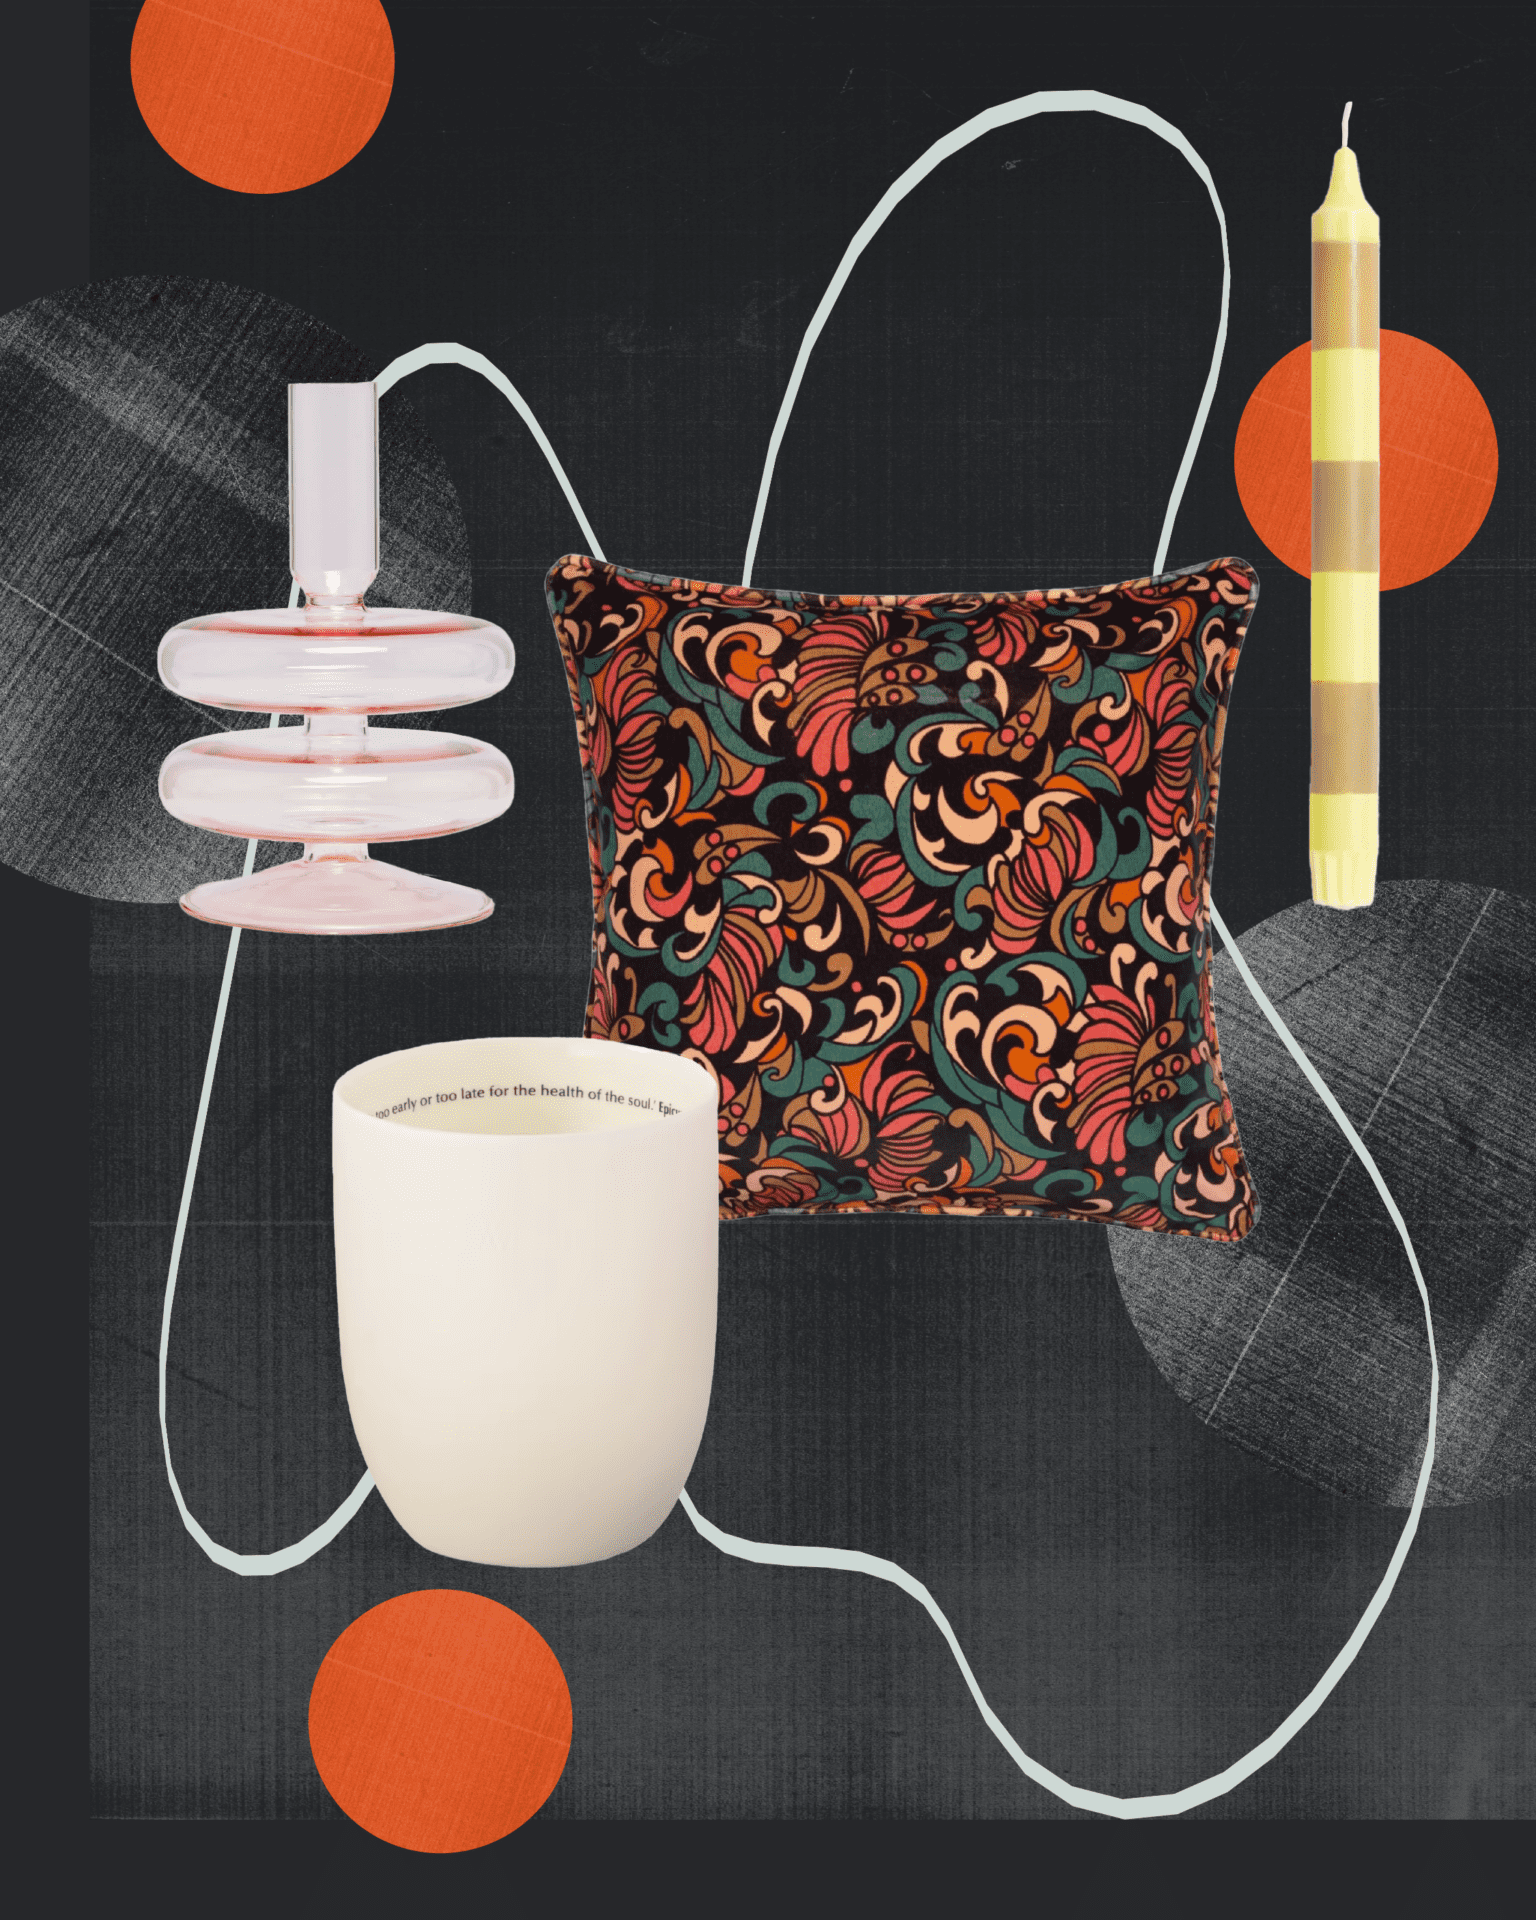 ROADBOOK christmas gift guide | An assortment of homewares on a collage background